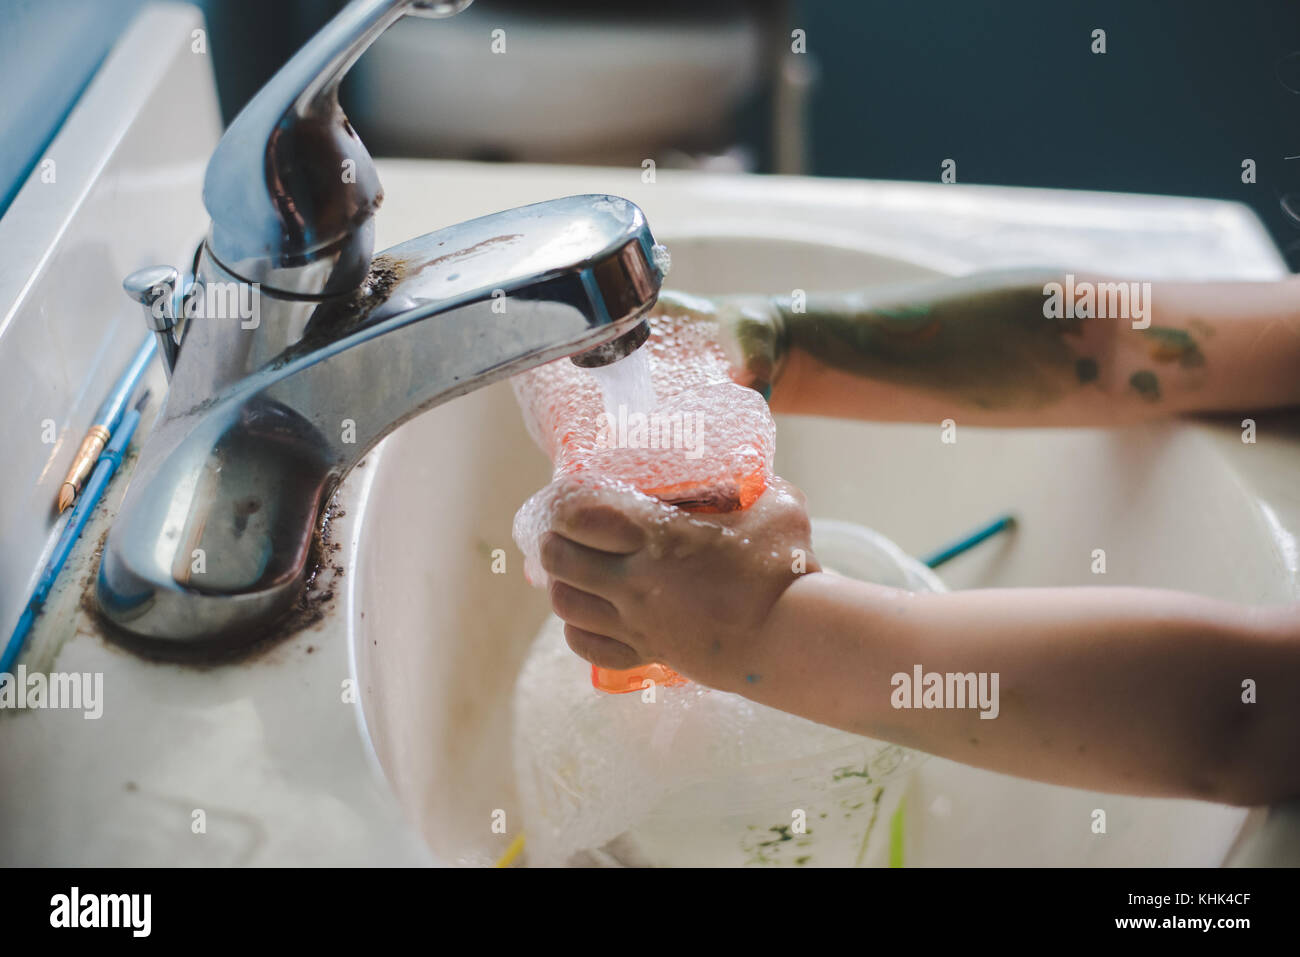 A toddler girl washing paint off her hands in a bathroom sink. Stock Photo